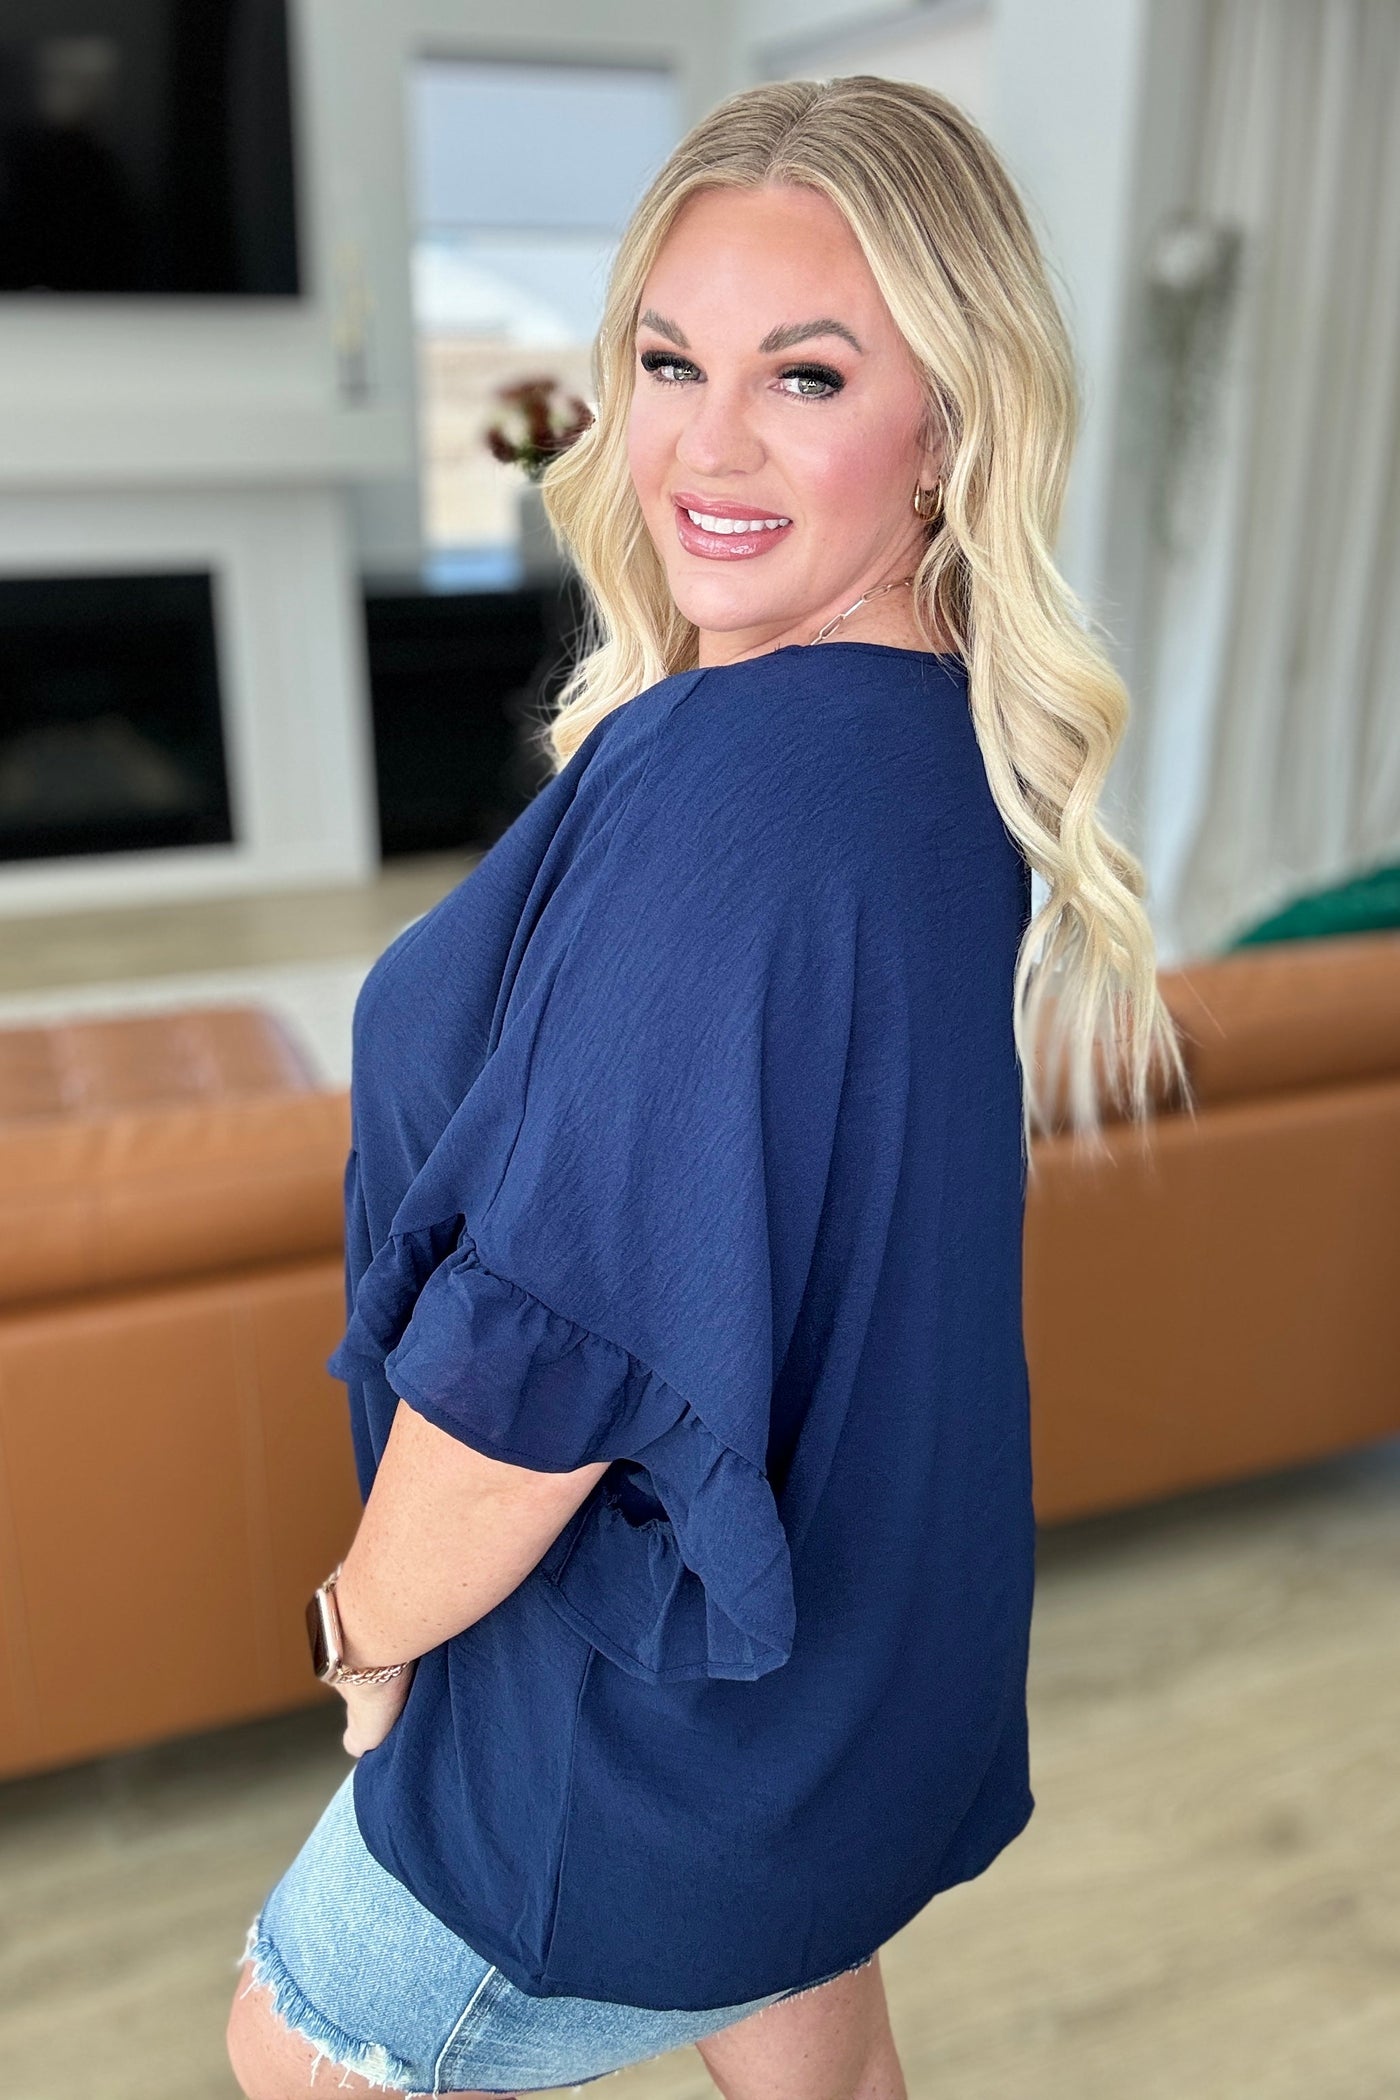 Airflow Peplum Ruffle Sleeve Top in Navy-Tops-Ave Shops-Market Street Nest, Fashionable Clothing, Shoes and Home Décor Located in Mabank, TX